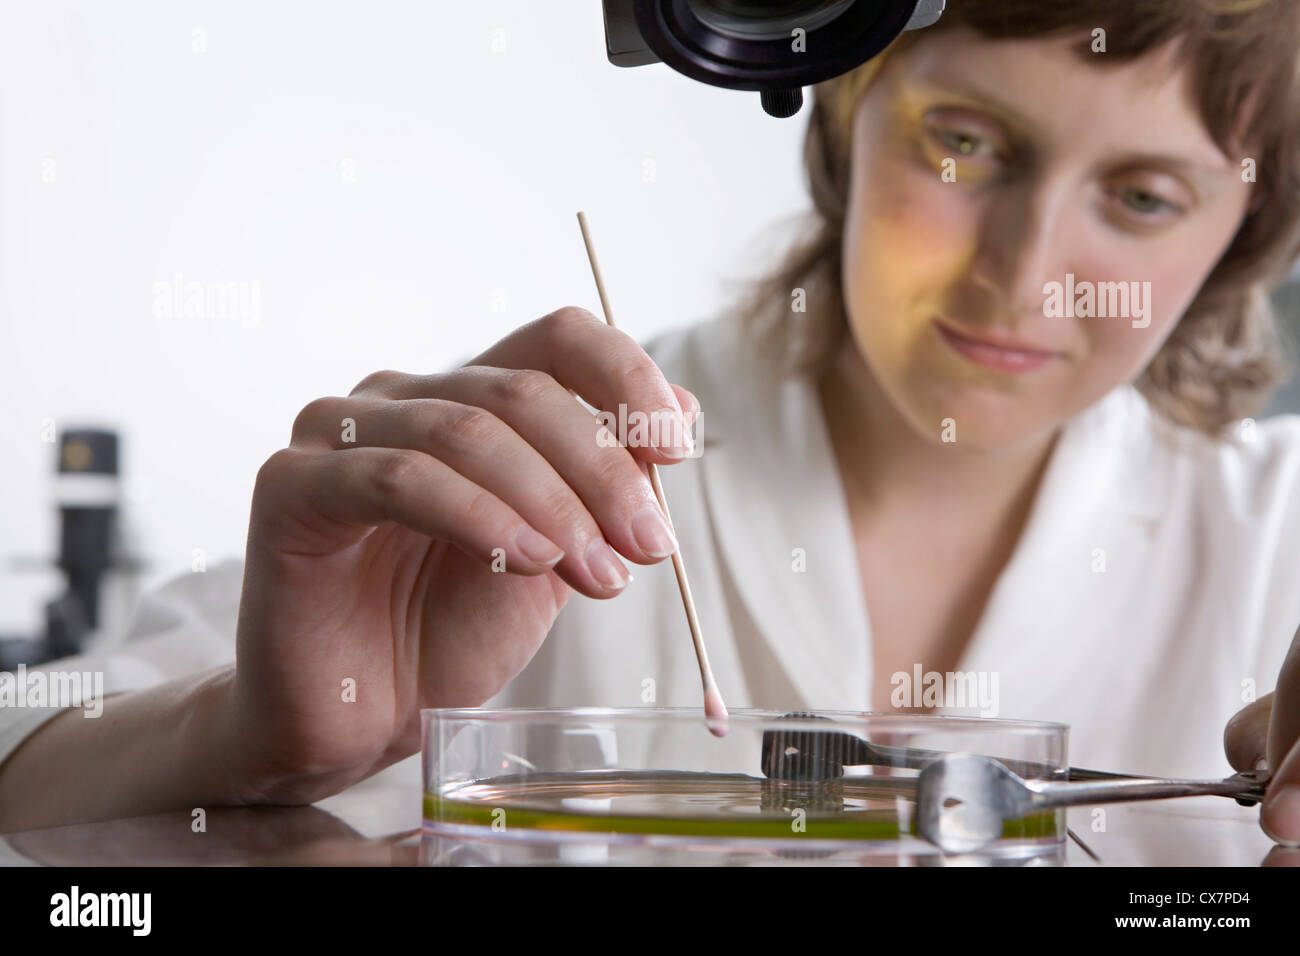 A research technician using a cotton swab on liquid in a Petri dish Stock Photo